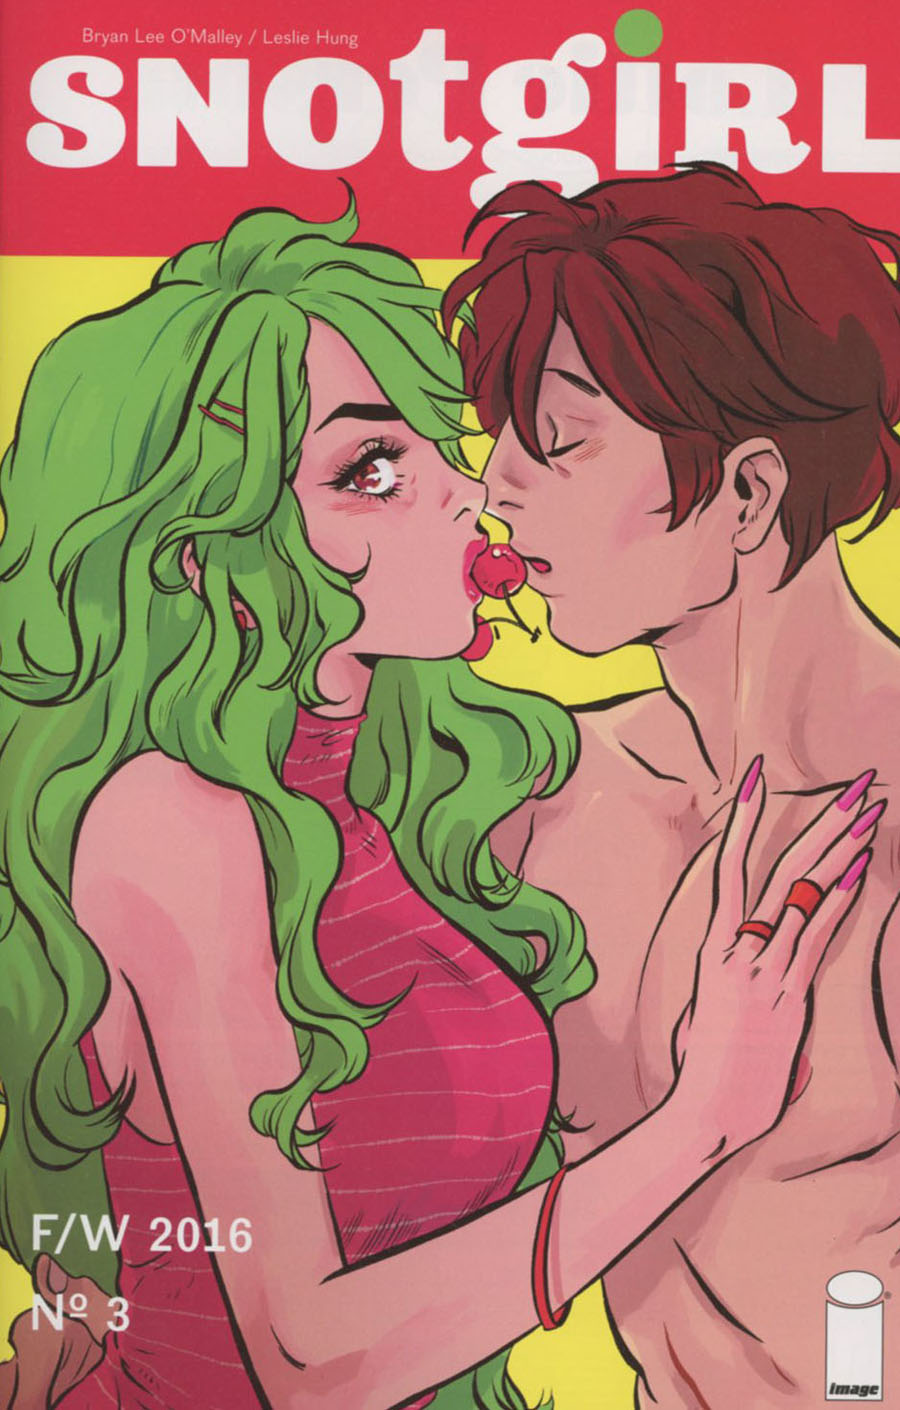 Snotgirl #3 Cover A Leslie Hung